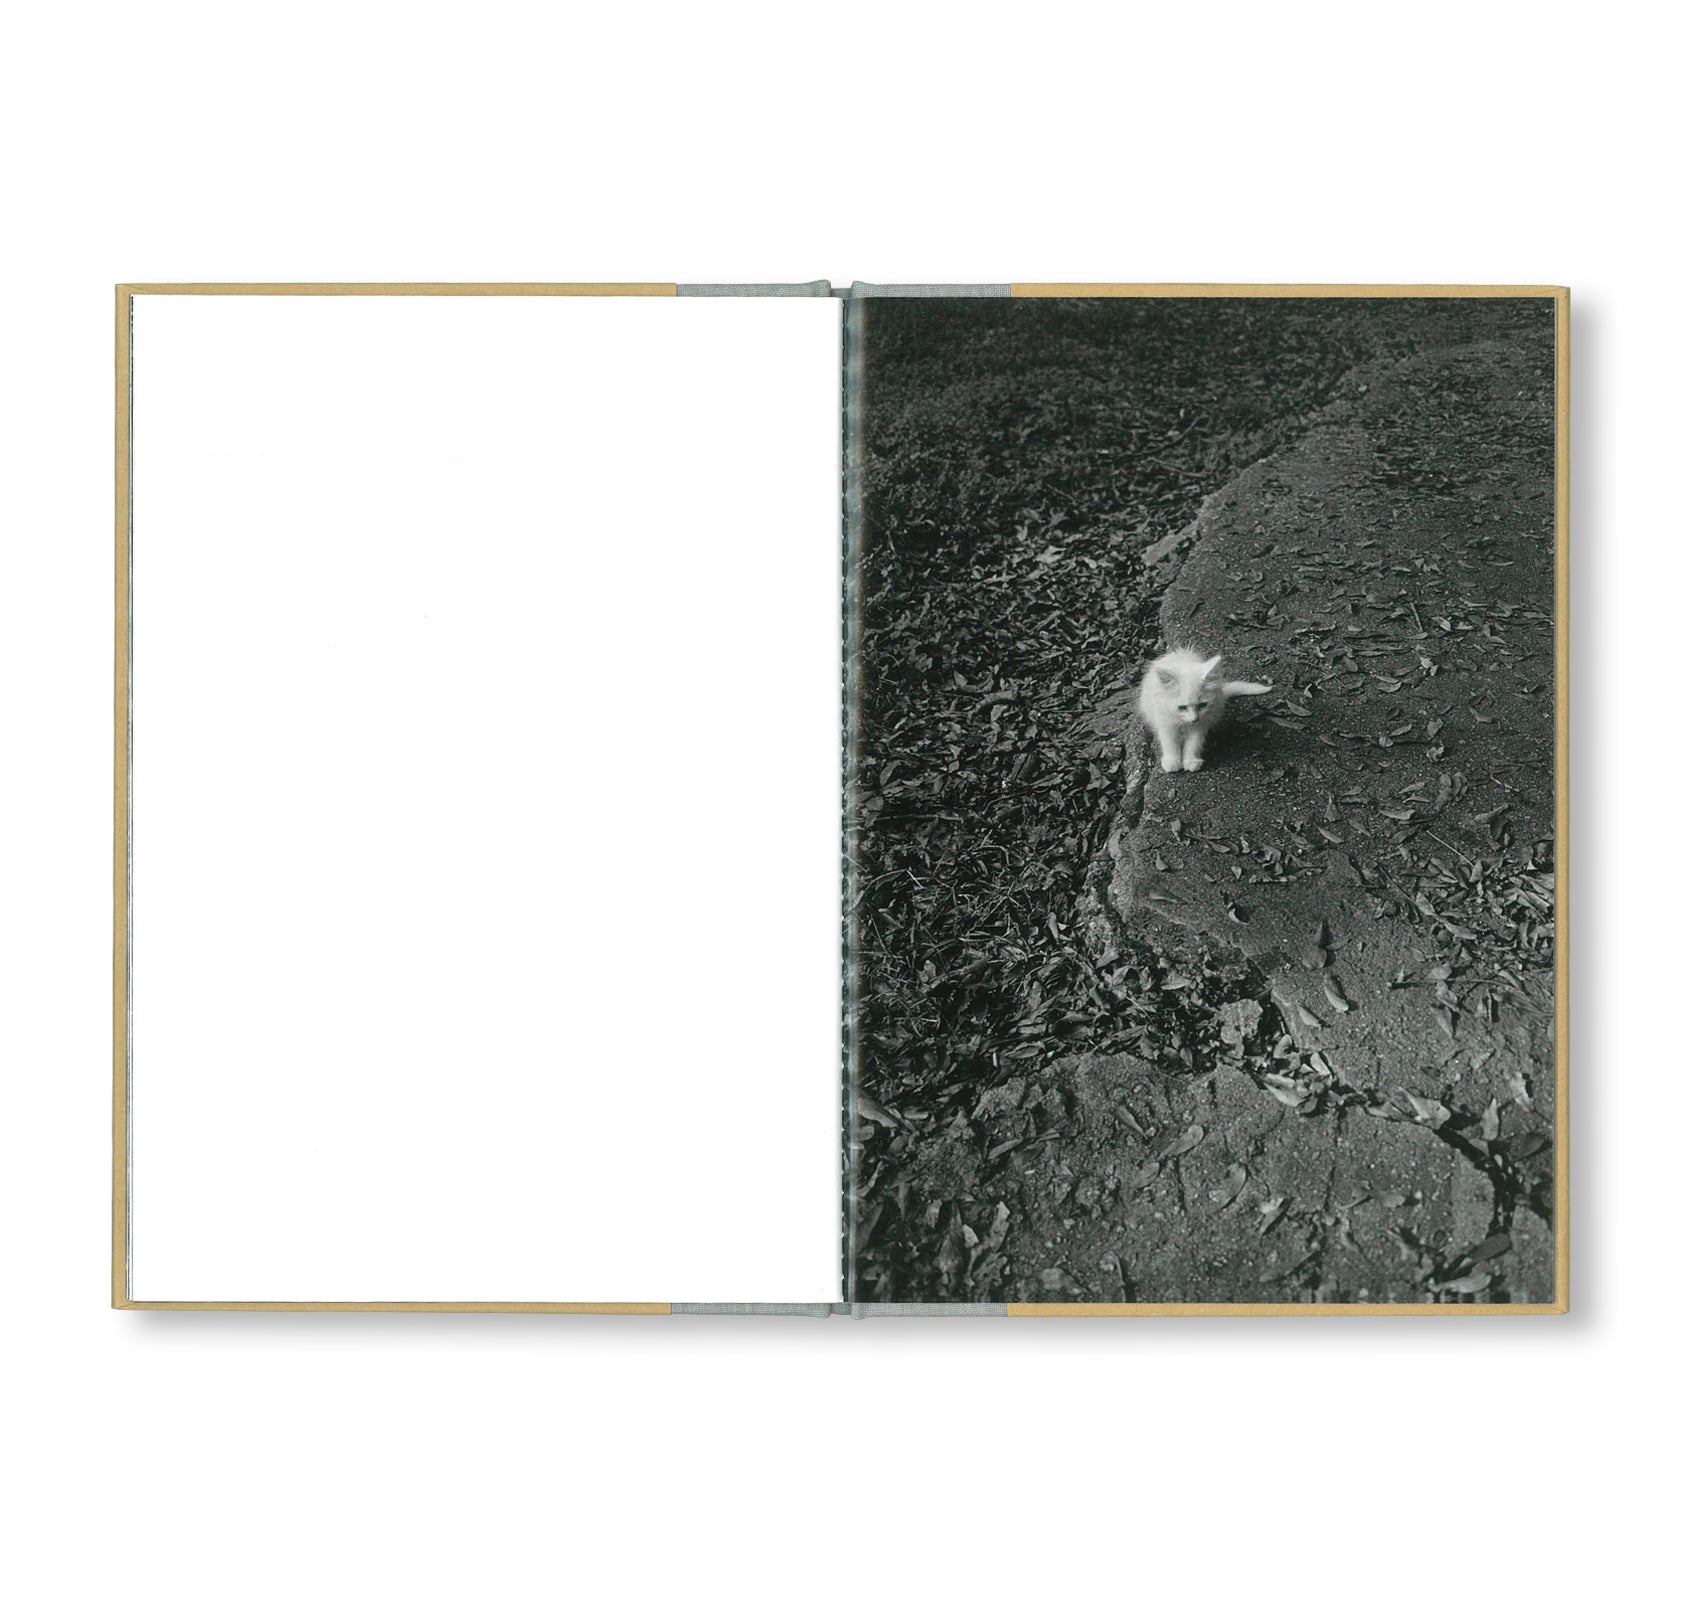 ONE PICTURE BOOK TWO #16: CATS by Mark Steinmetz